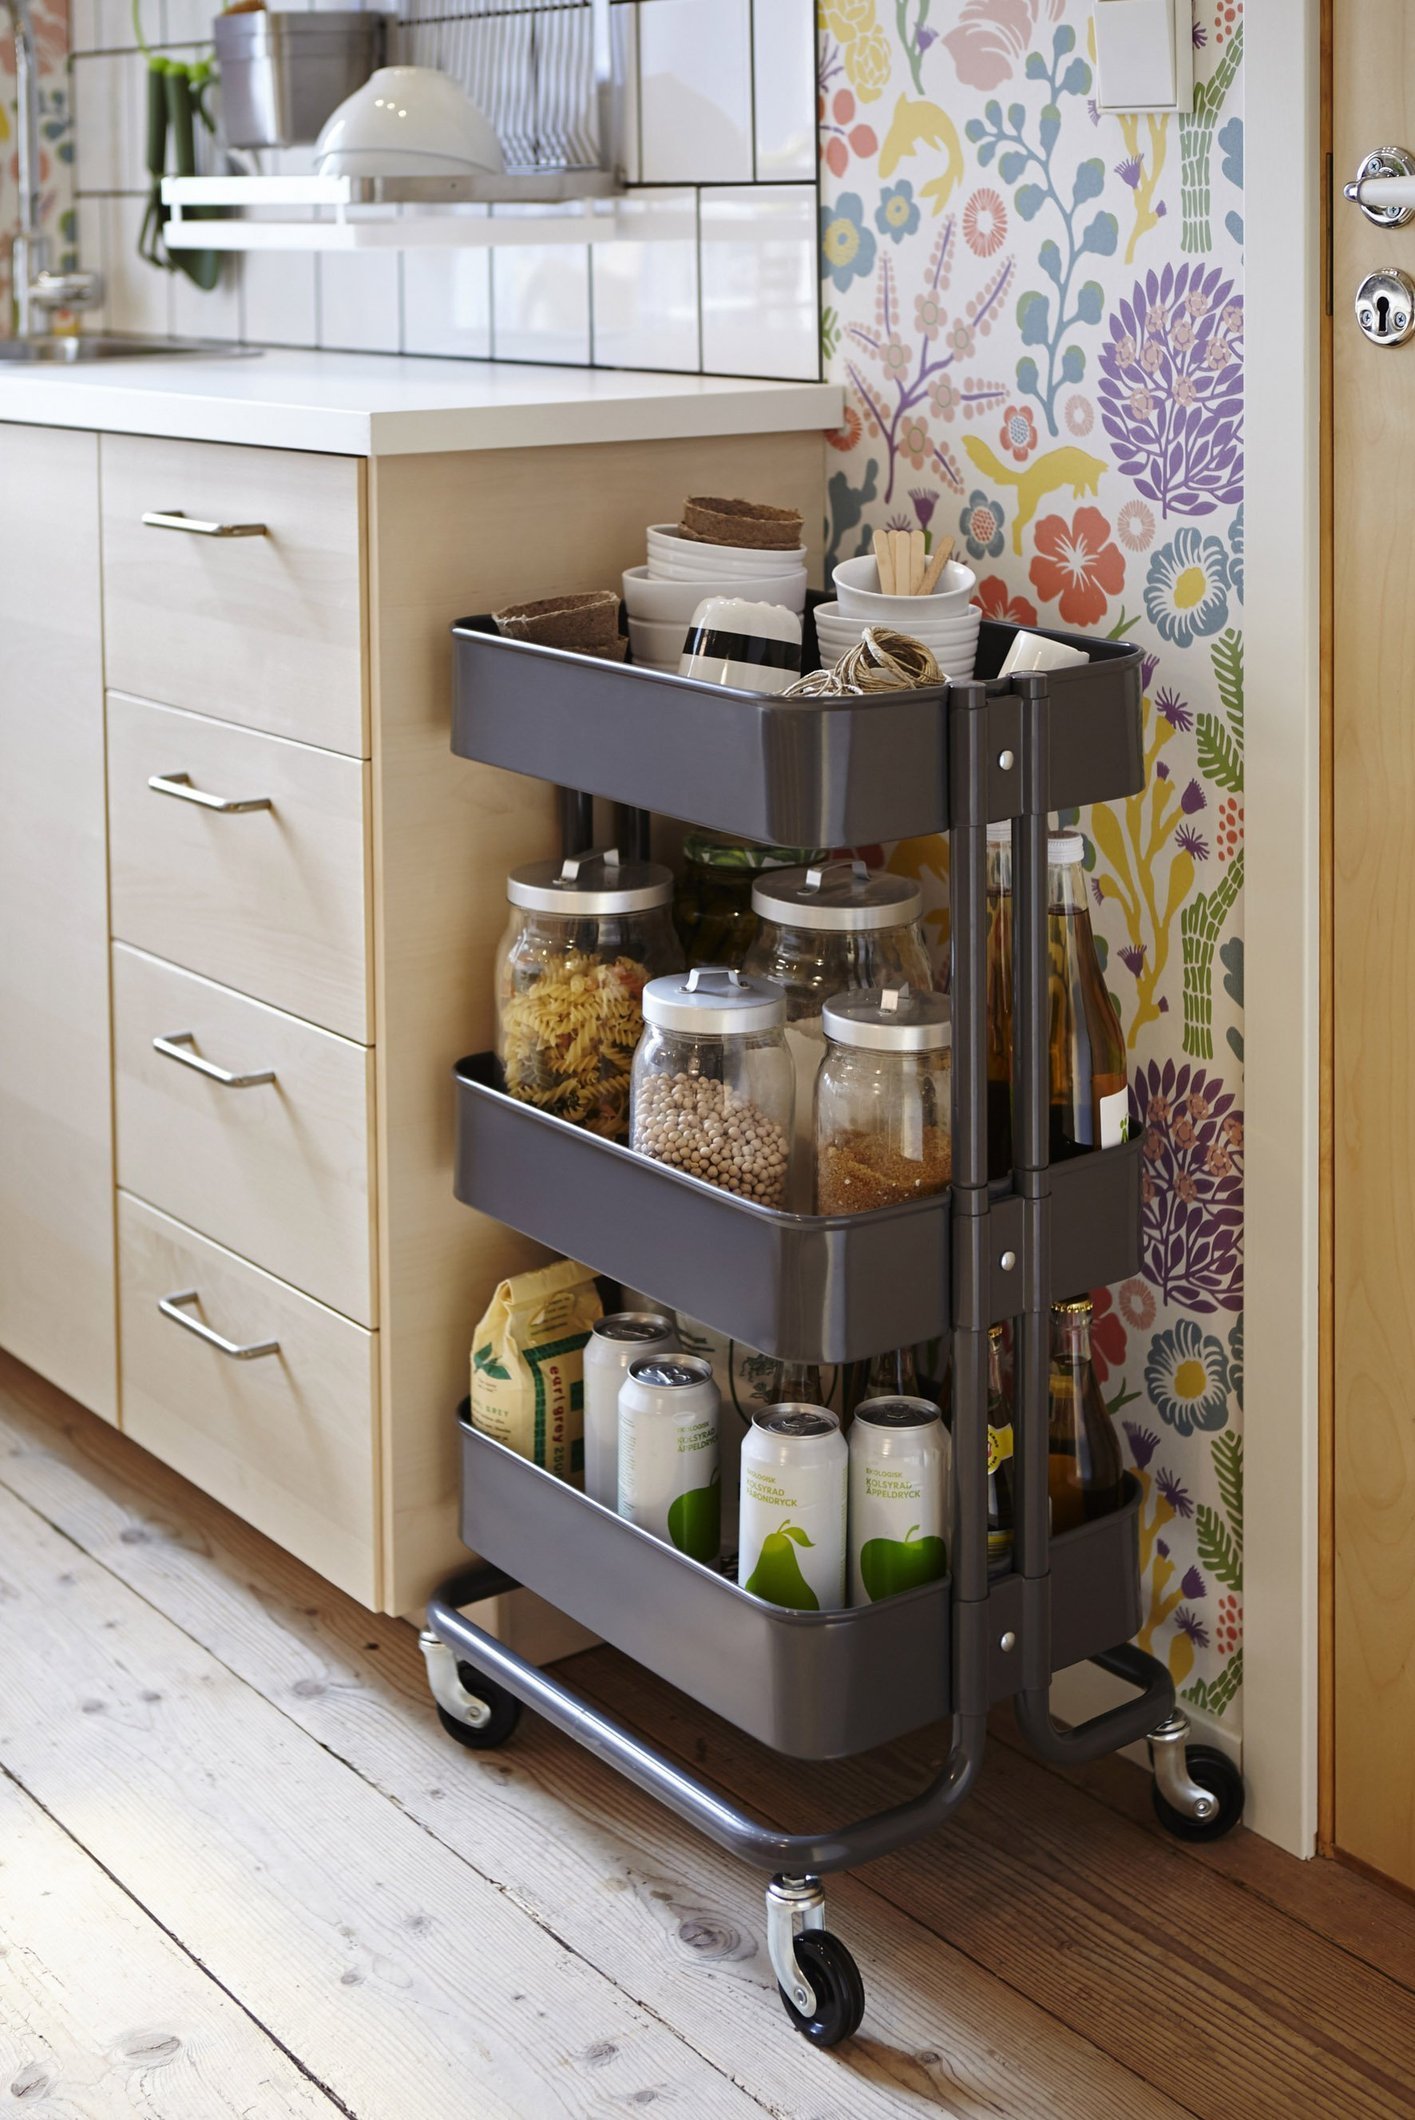 Black Raskog cart could be useful to move your cooking supplies around the kitchen.